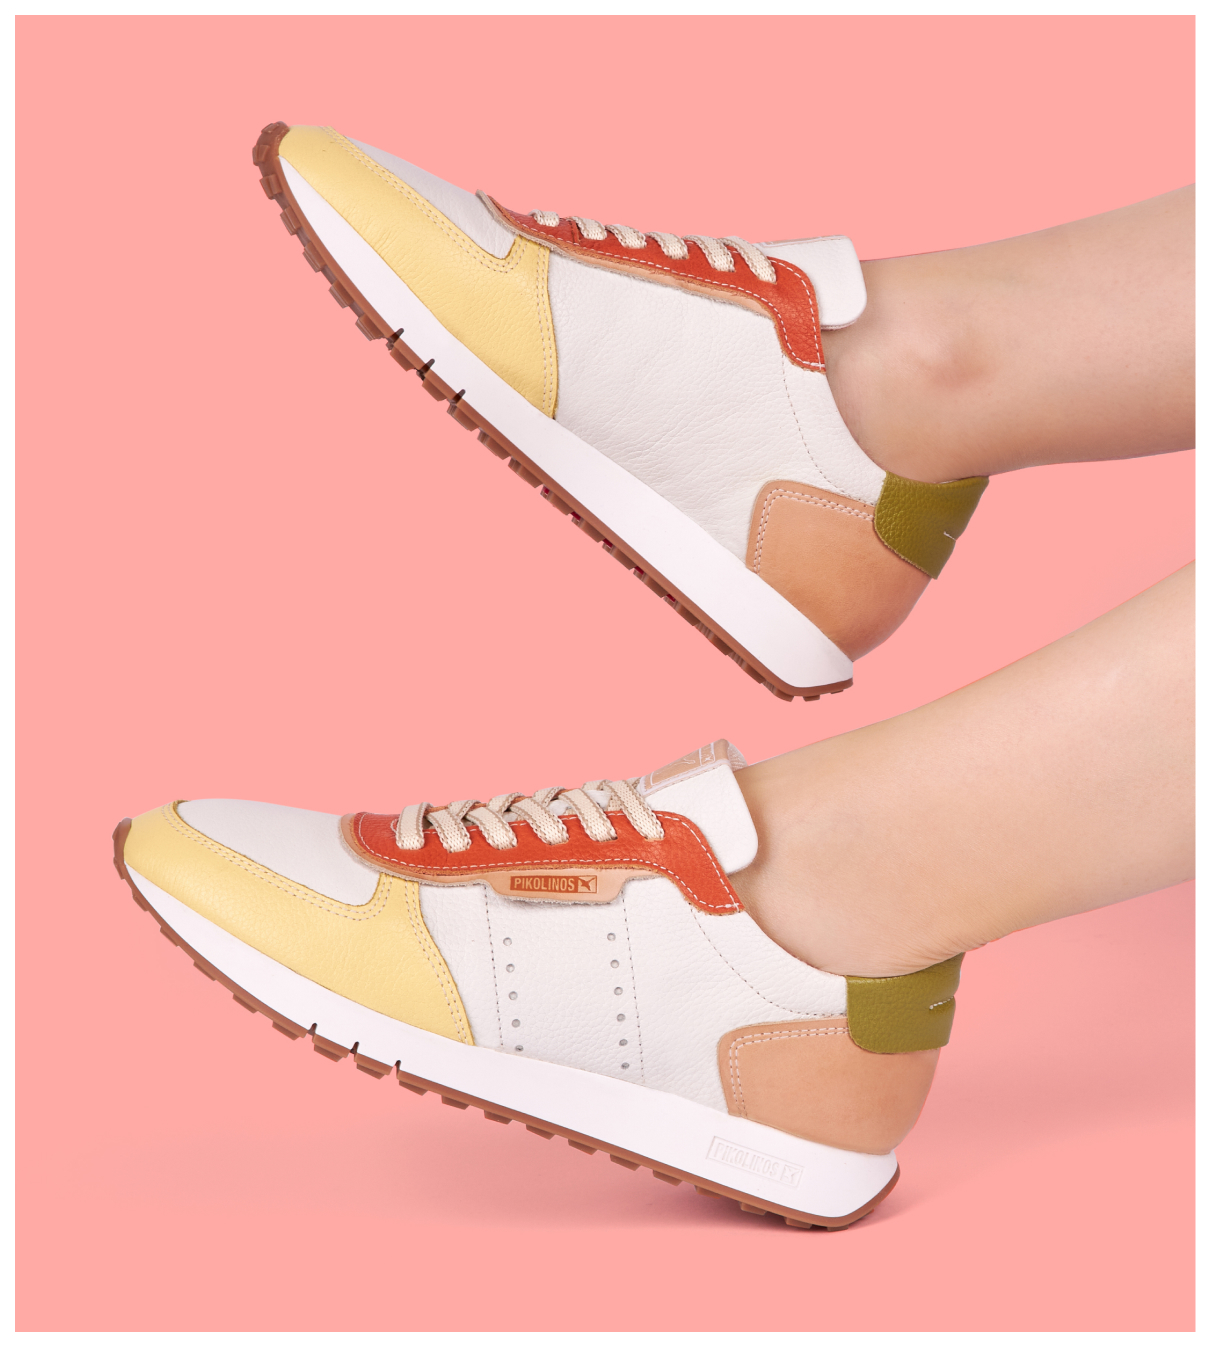 Women's creamy sneakers on a pink background